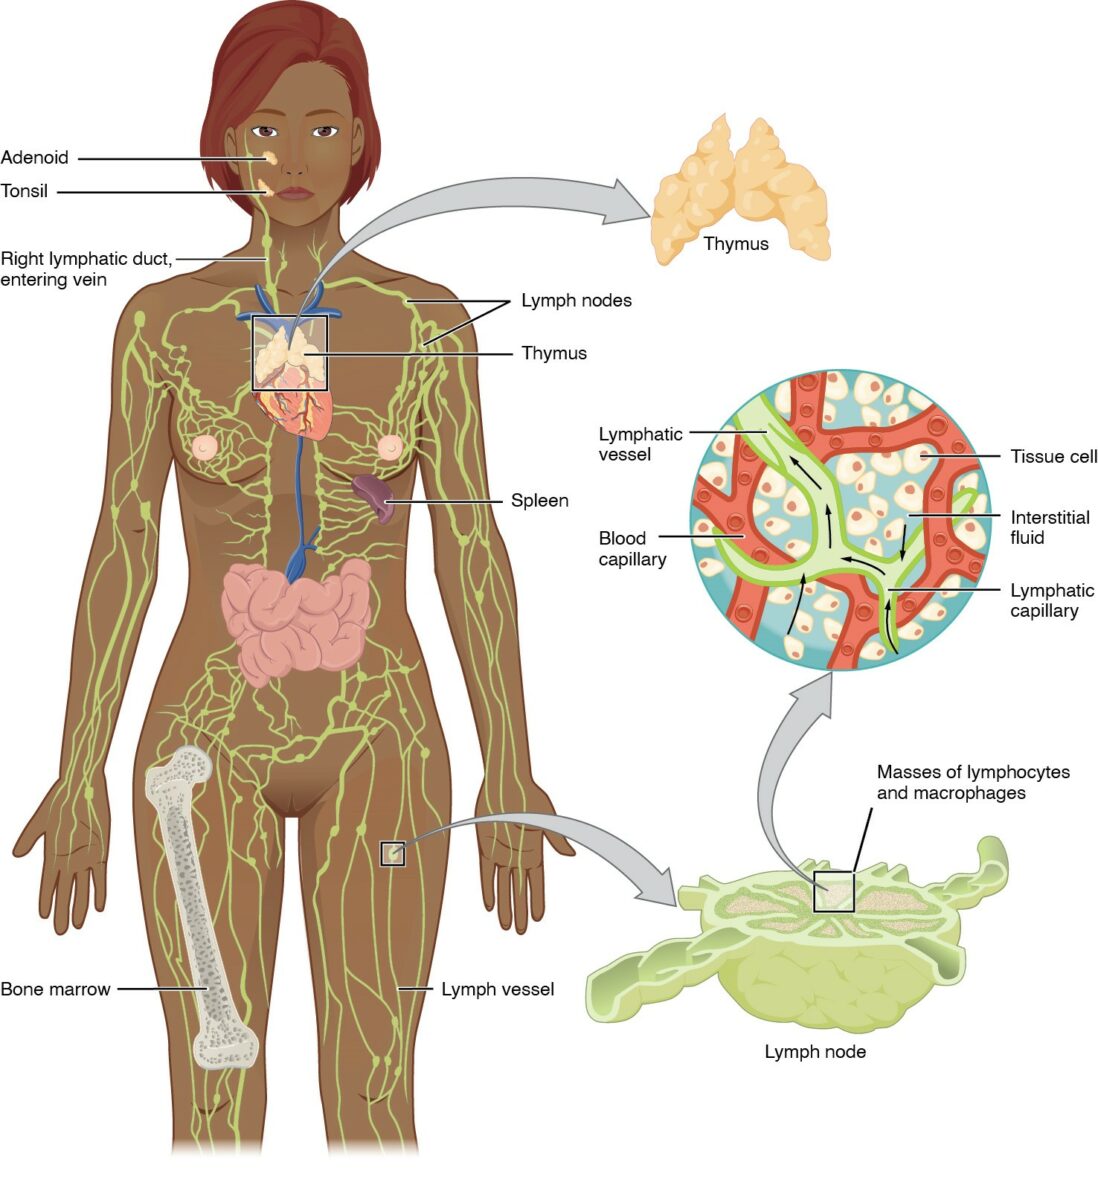 Anatomy of the lymphatic system